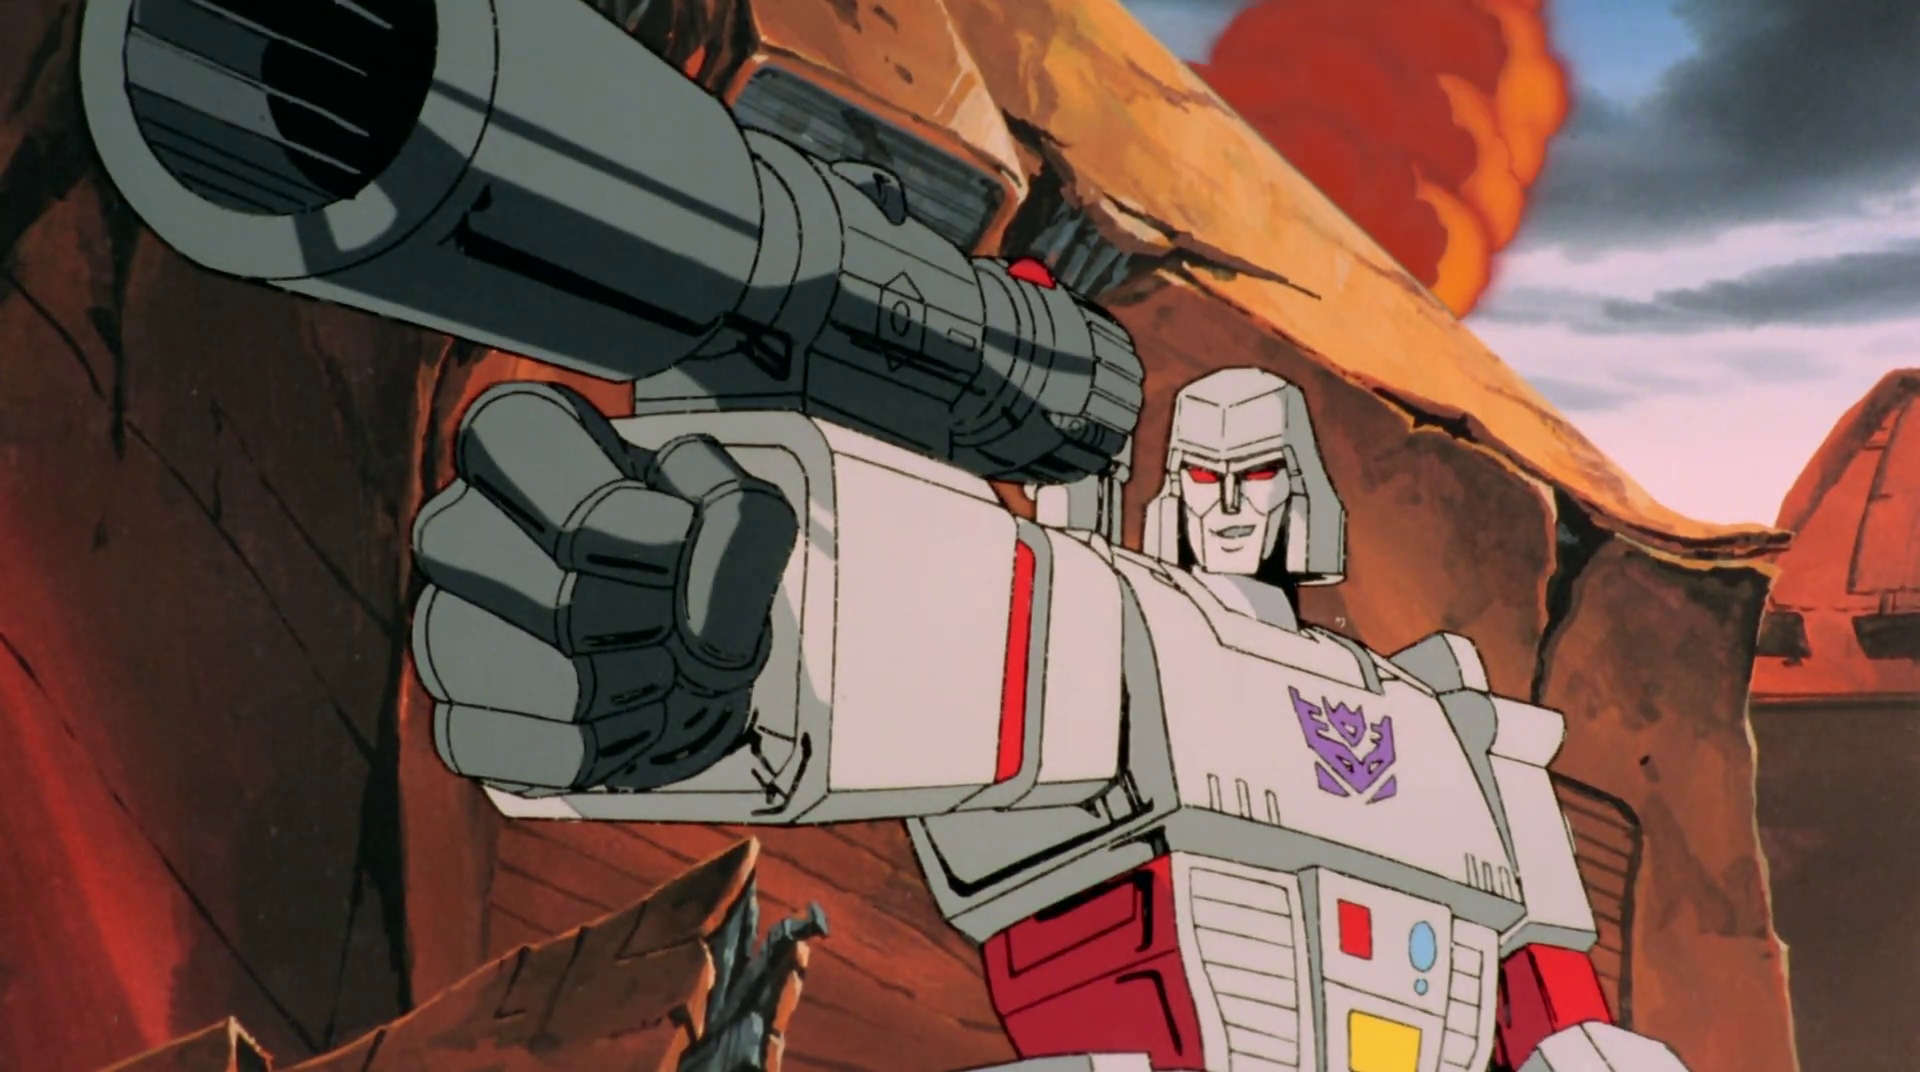 Megatron FROM Transformers The Movie 1986. Transformers, Transformers megatron, Transformers artwork